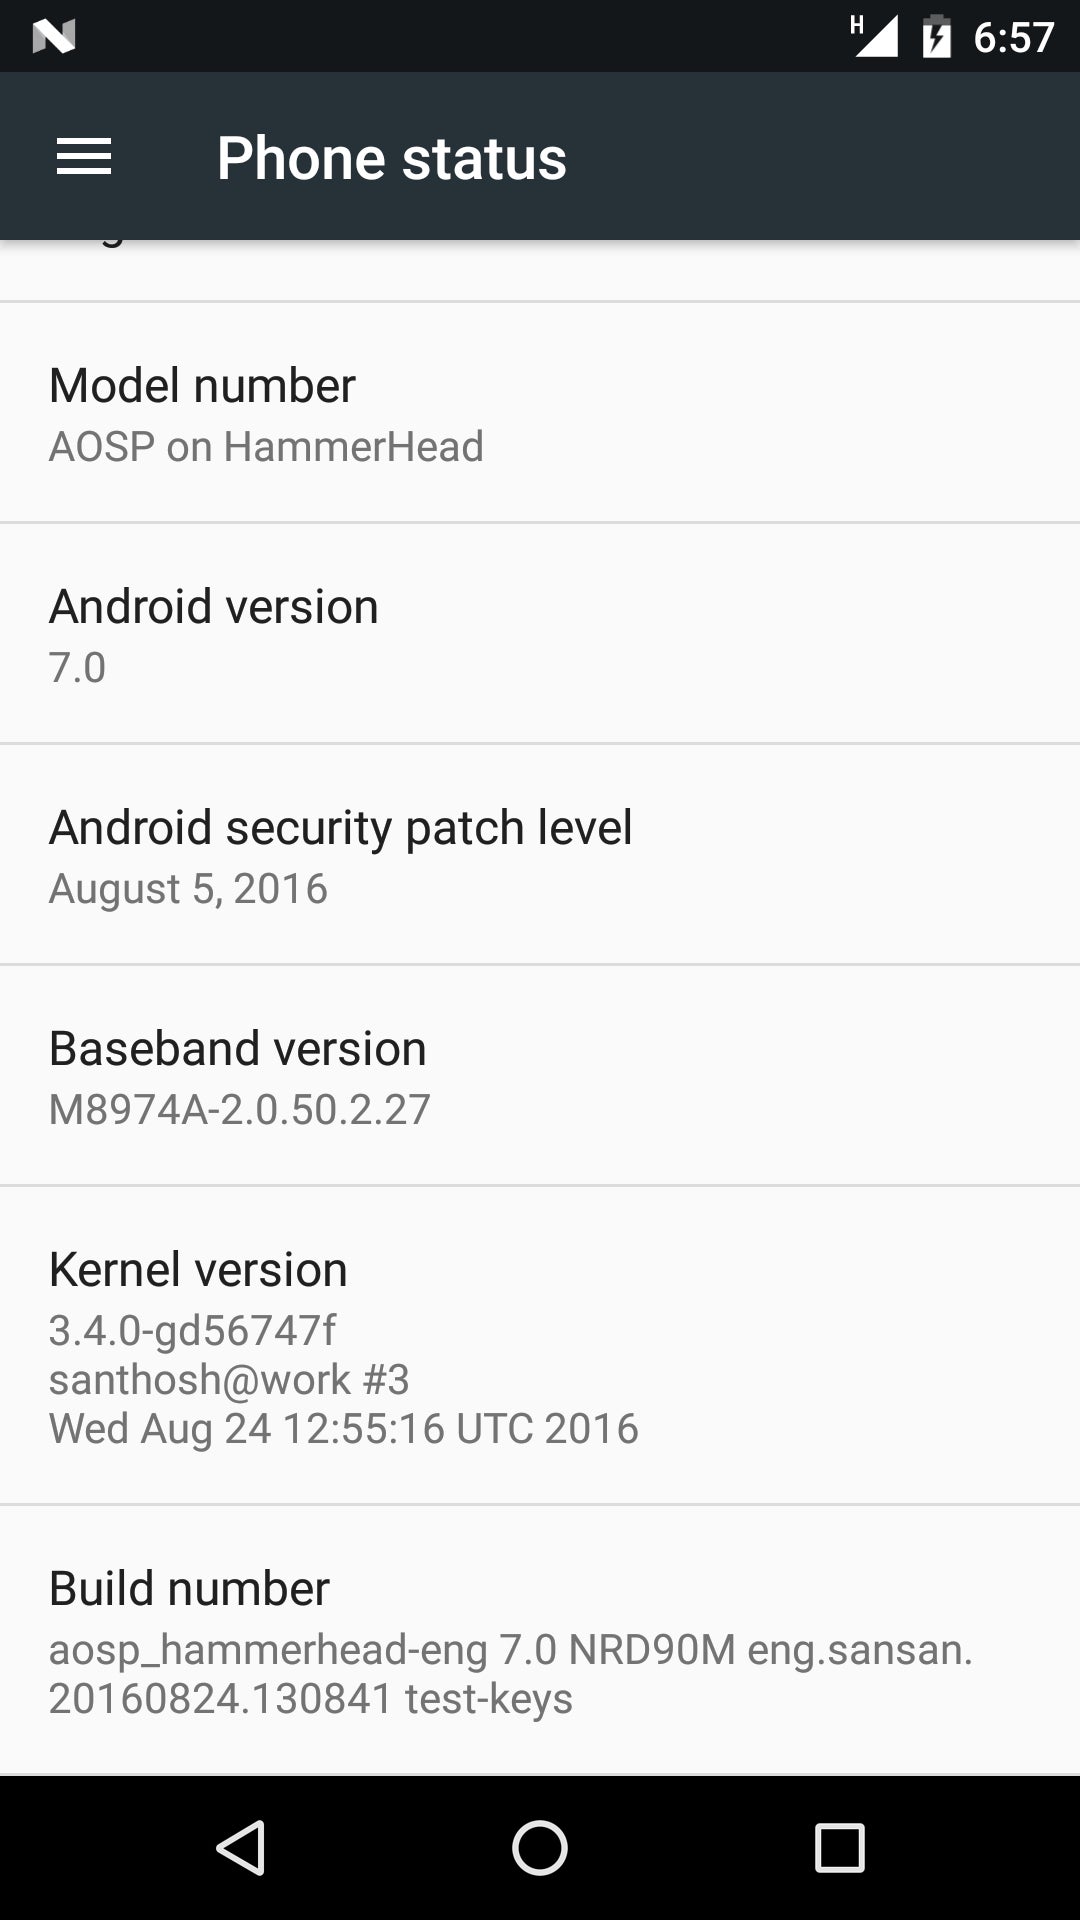 Android 7.0 Nougat (sort of) up and running on the Google Nexus 5